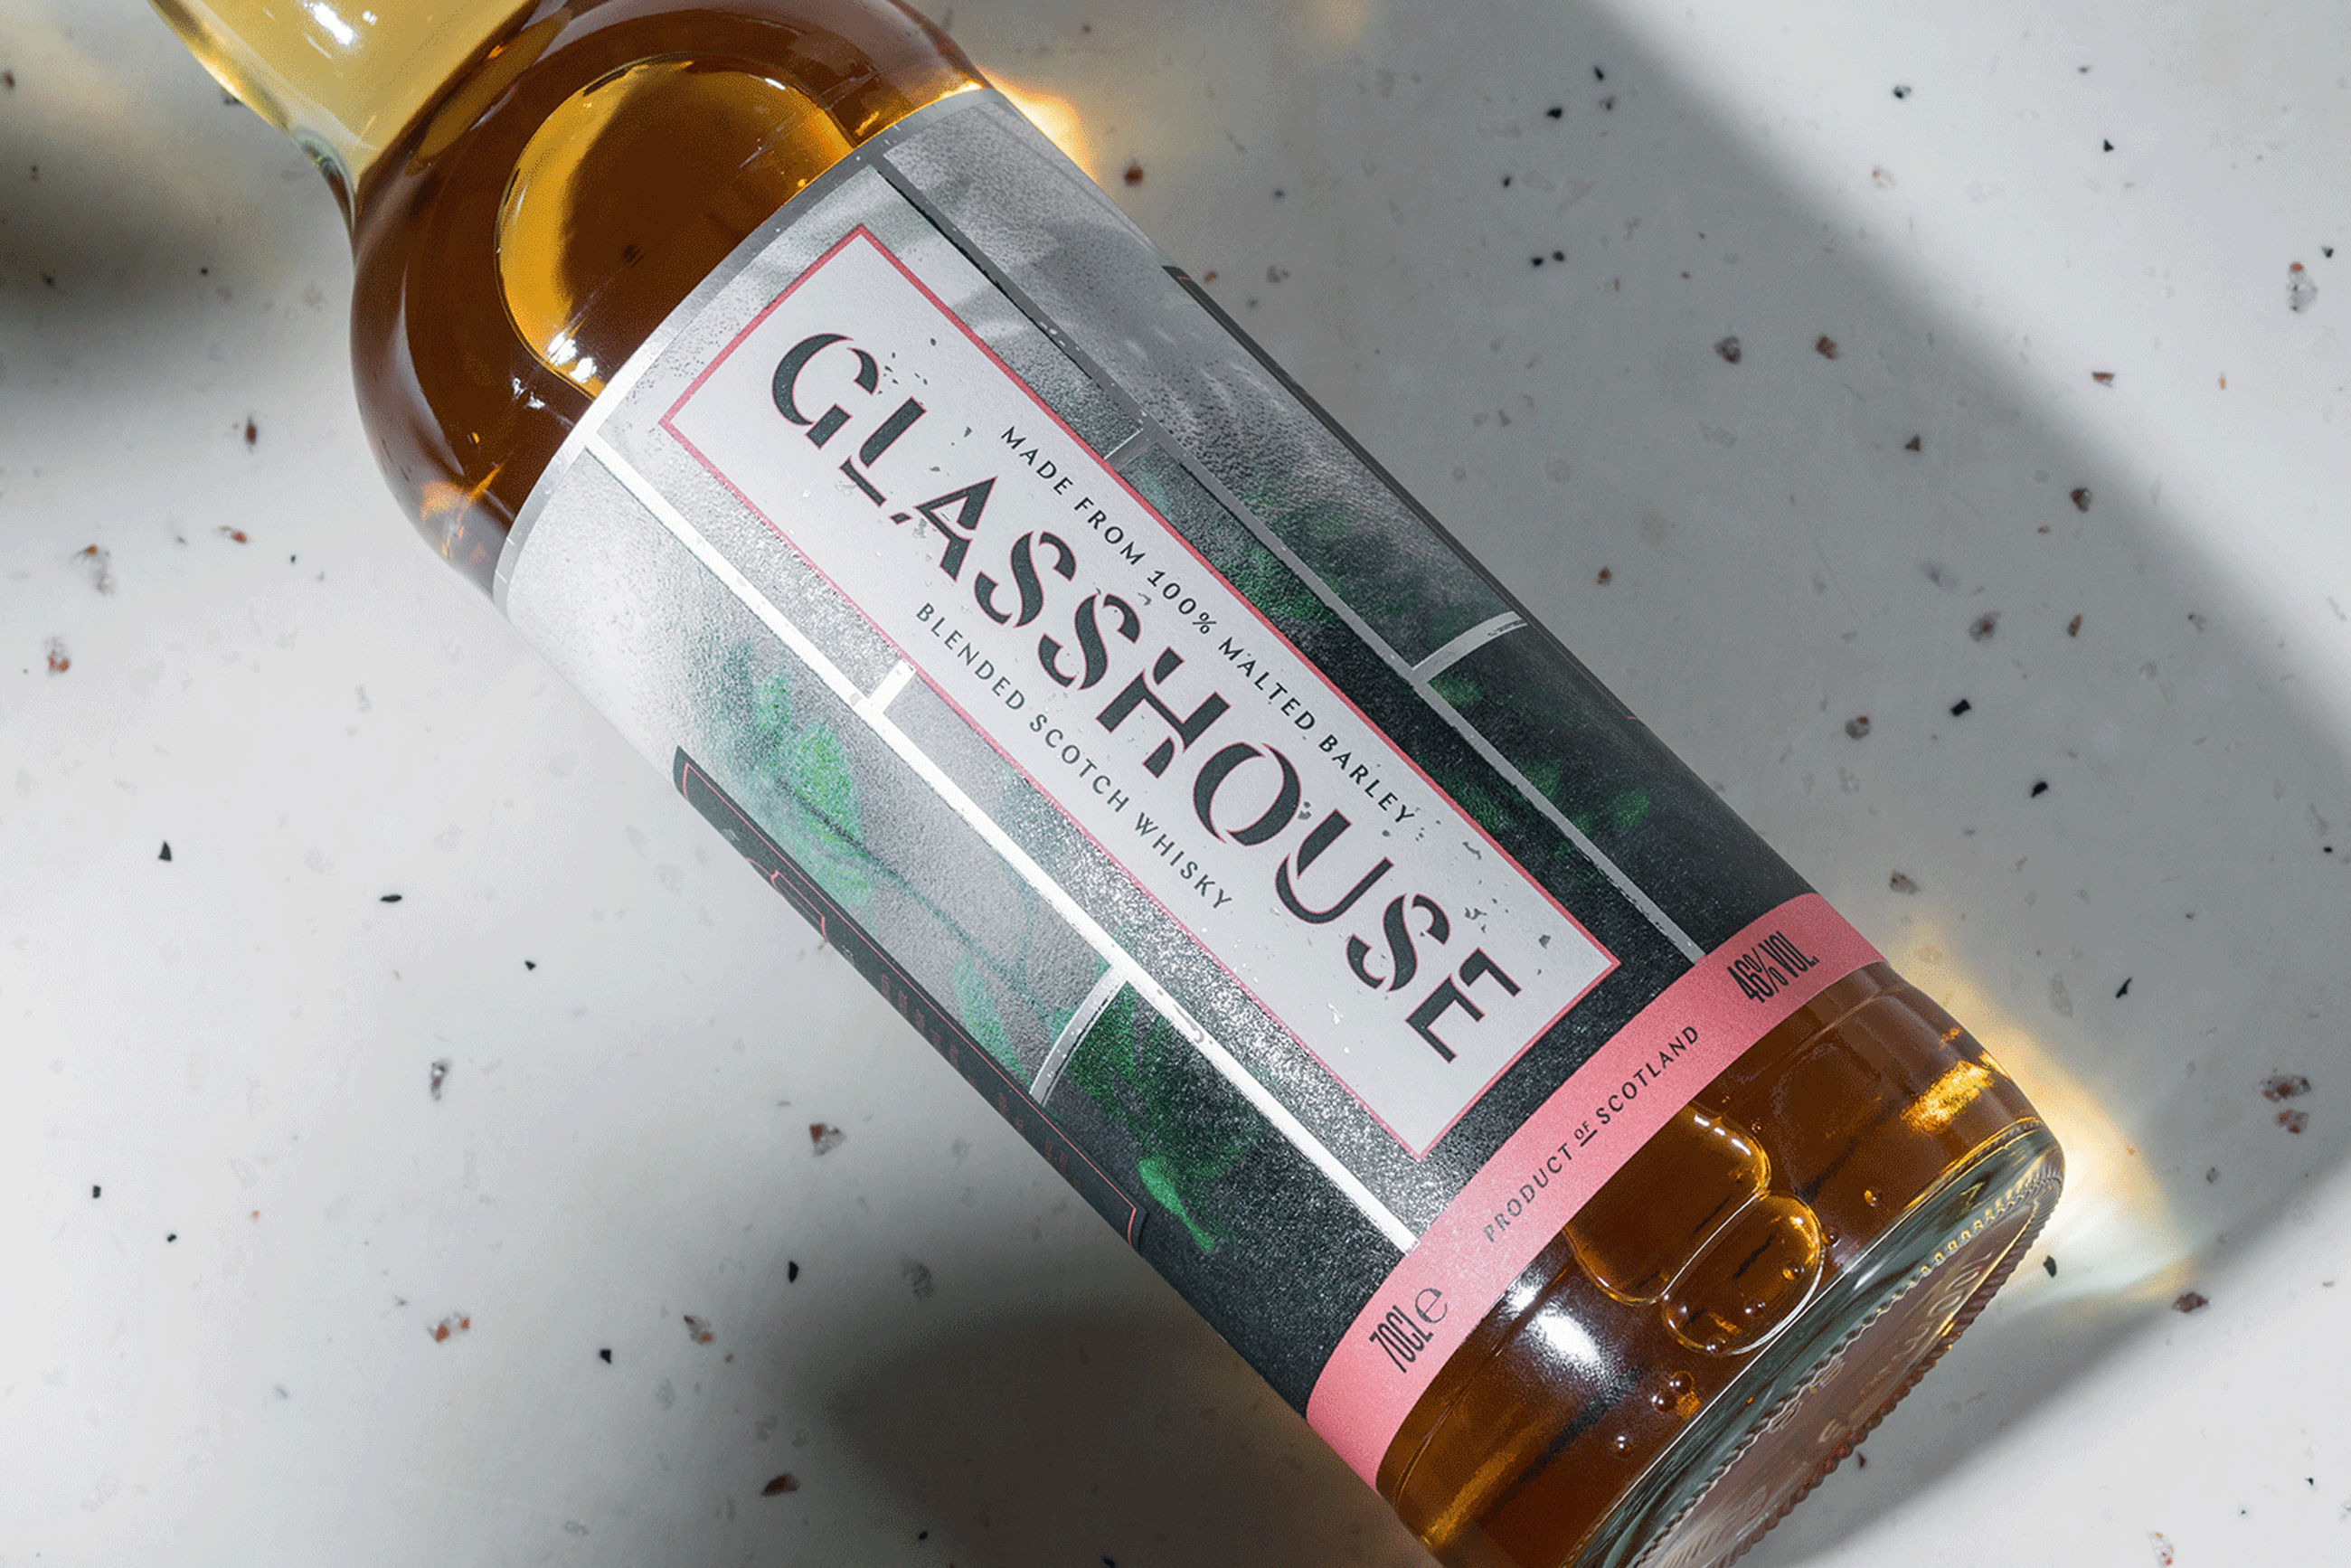 Thirst Craft Shatters Stereotypes With Glasshouse, A Blended Whisky Destined for Highballs